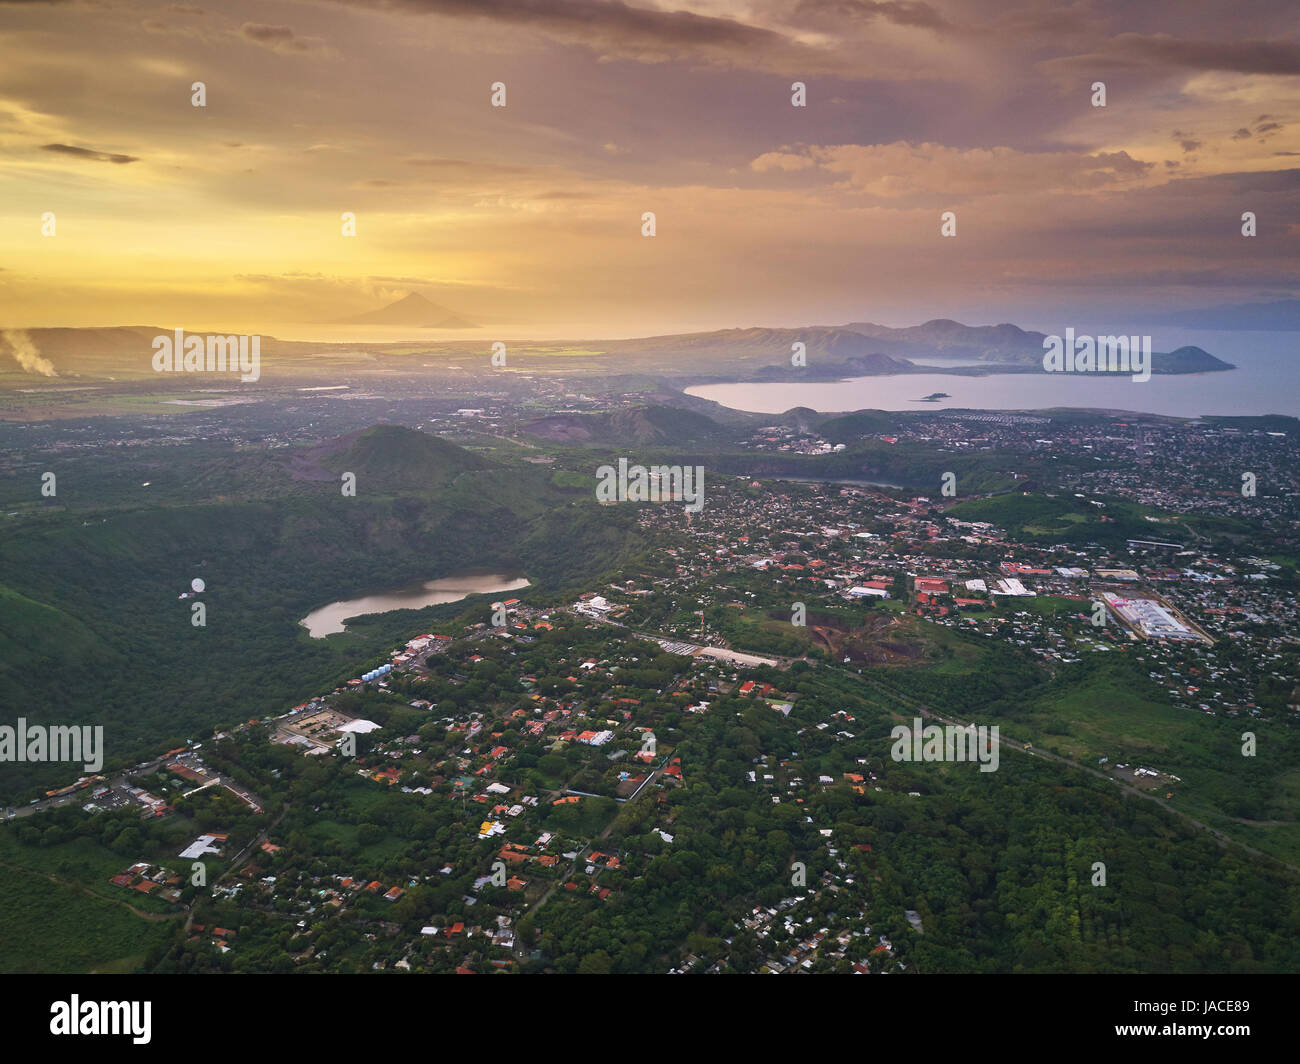 Tropical city landscape aerial view from drone. Managua aerial landscape Stock Photo